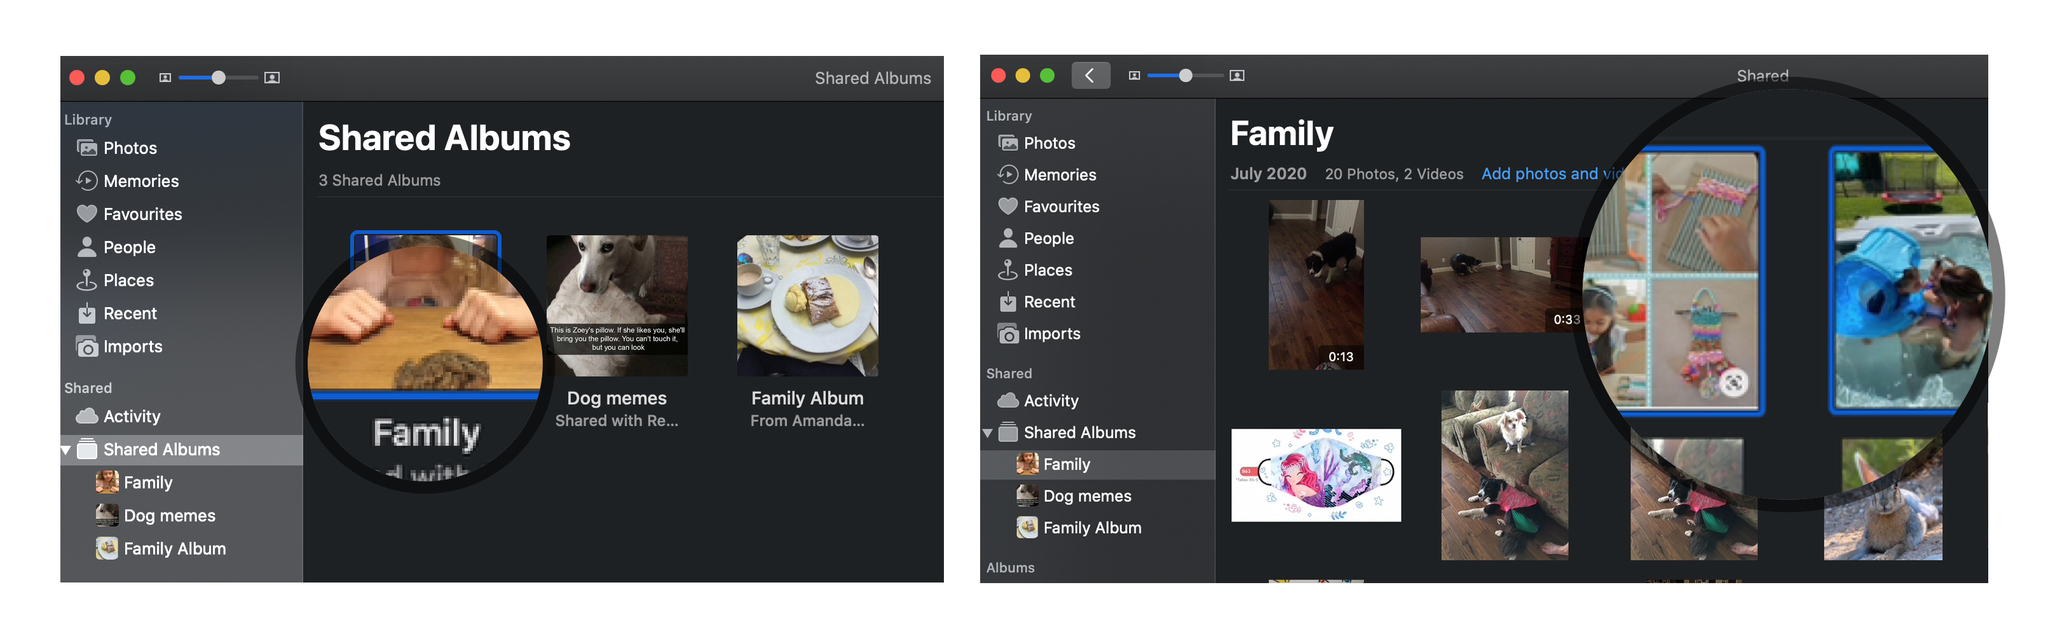 Remove photos or video from Family album on Mac: Launch photos, Select Shared Albums, Choose Photos